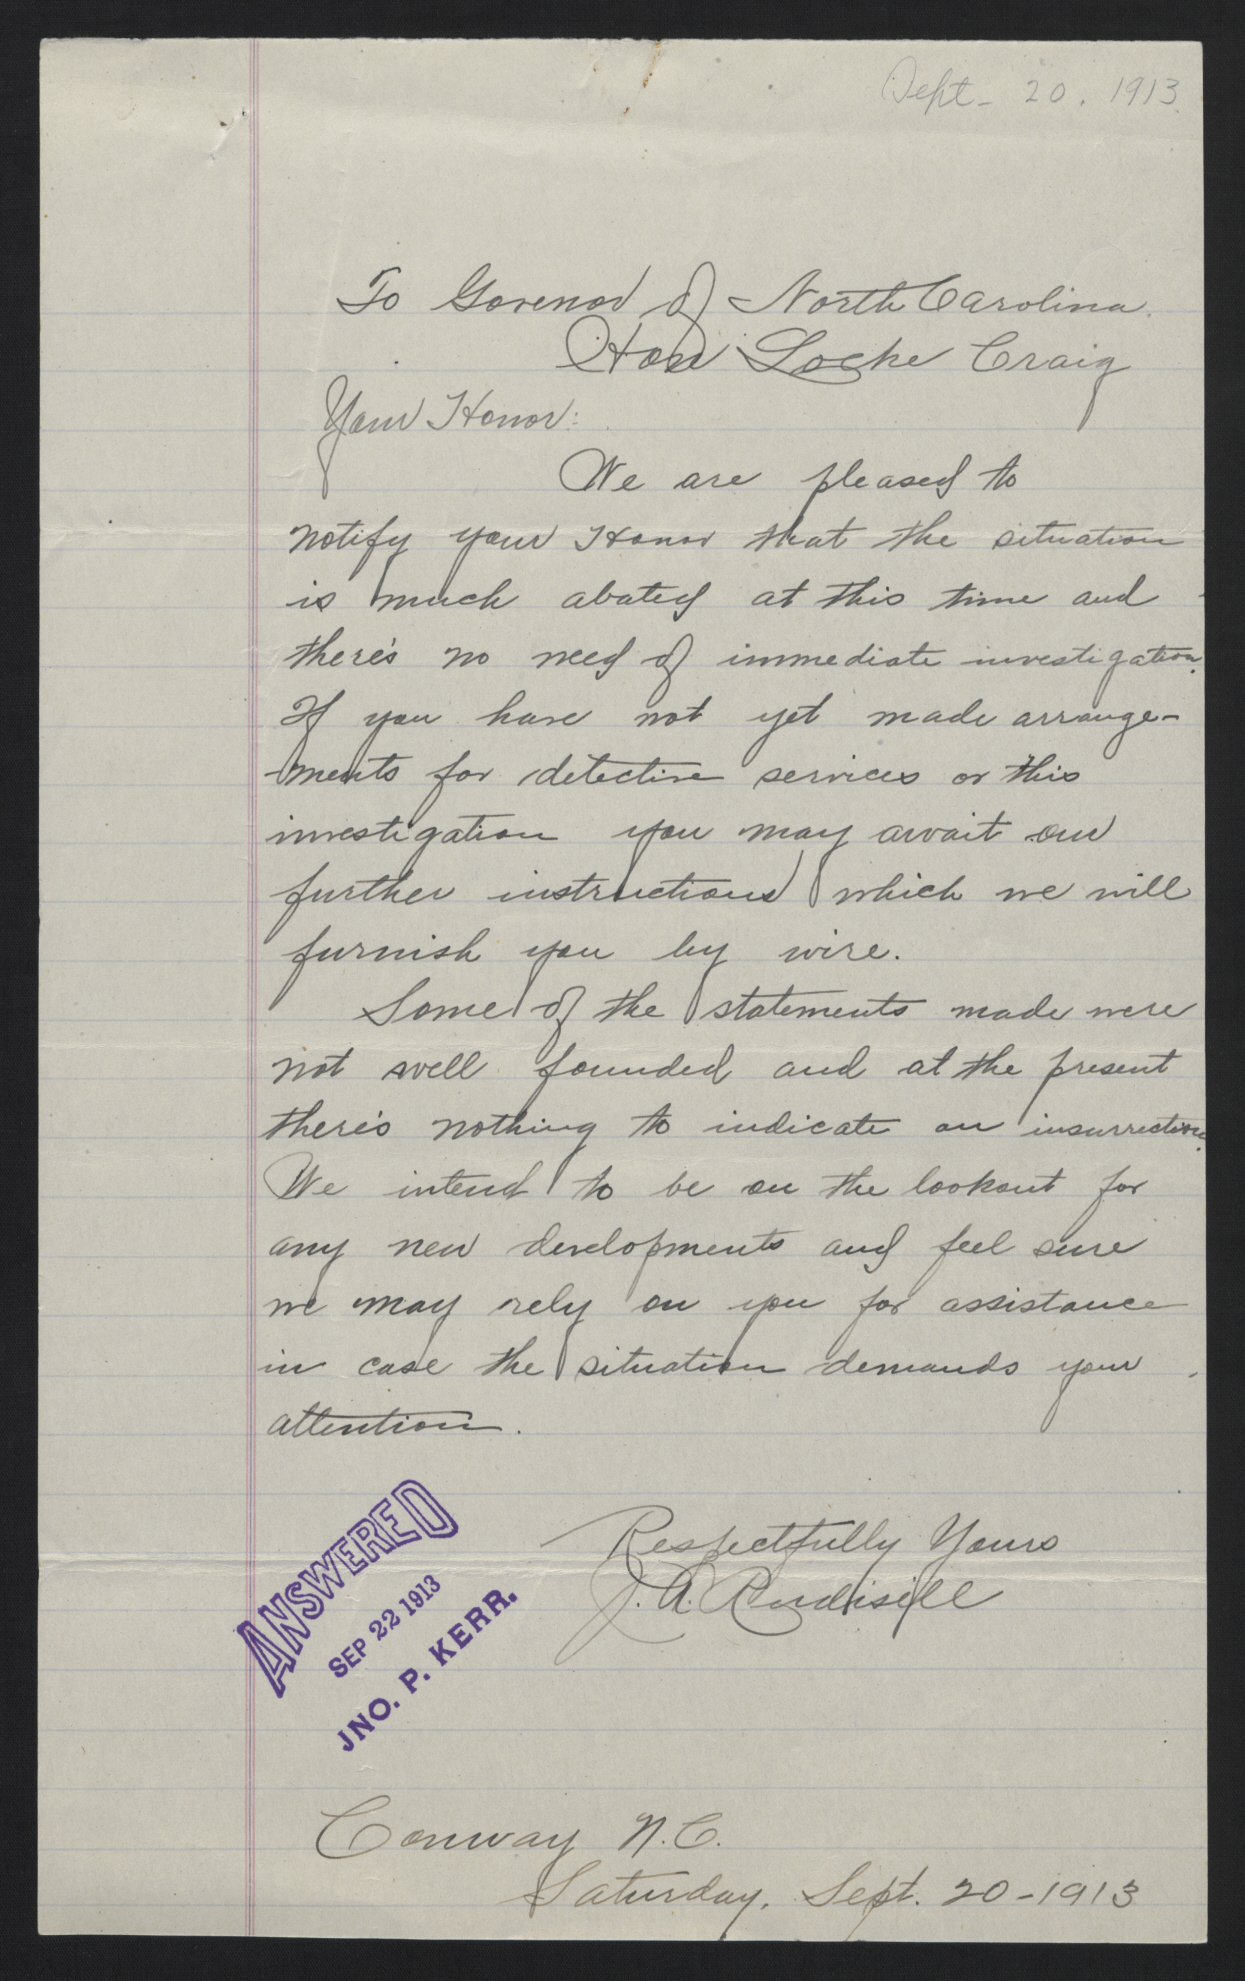 Letter from Rudisill to Craig, September 20, 1913